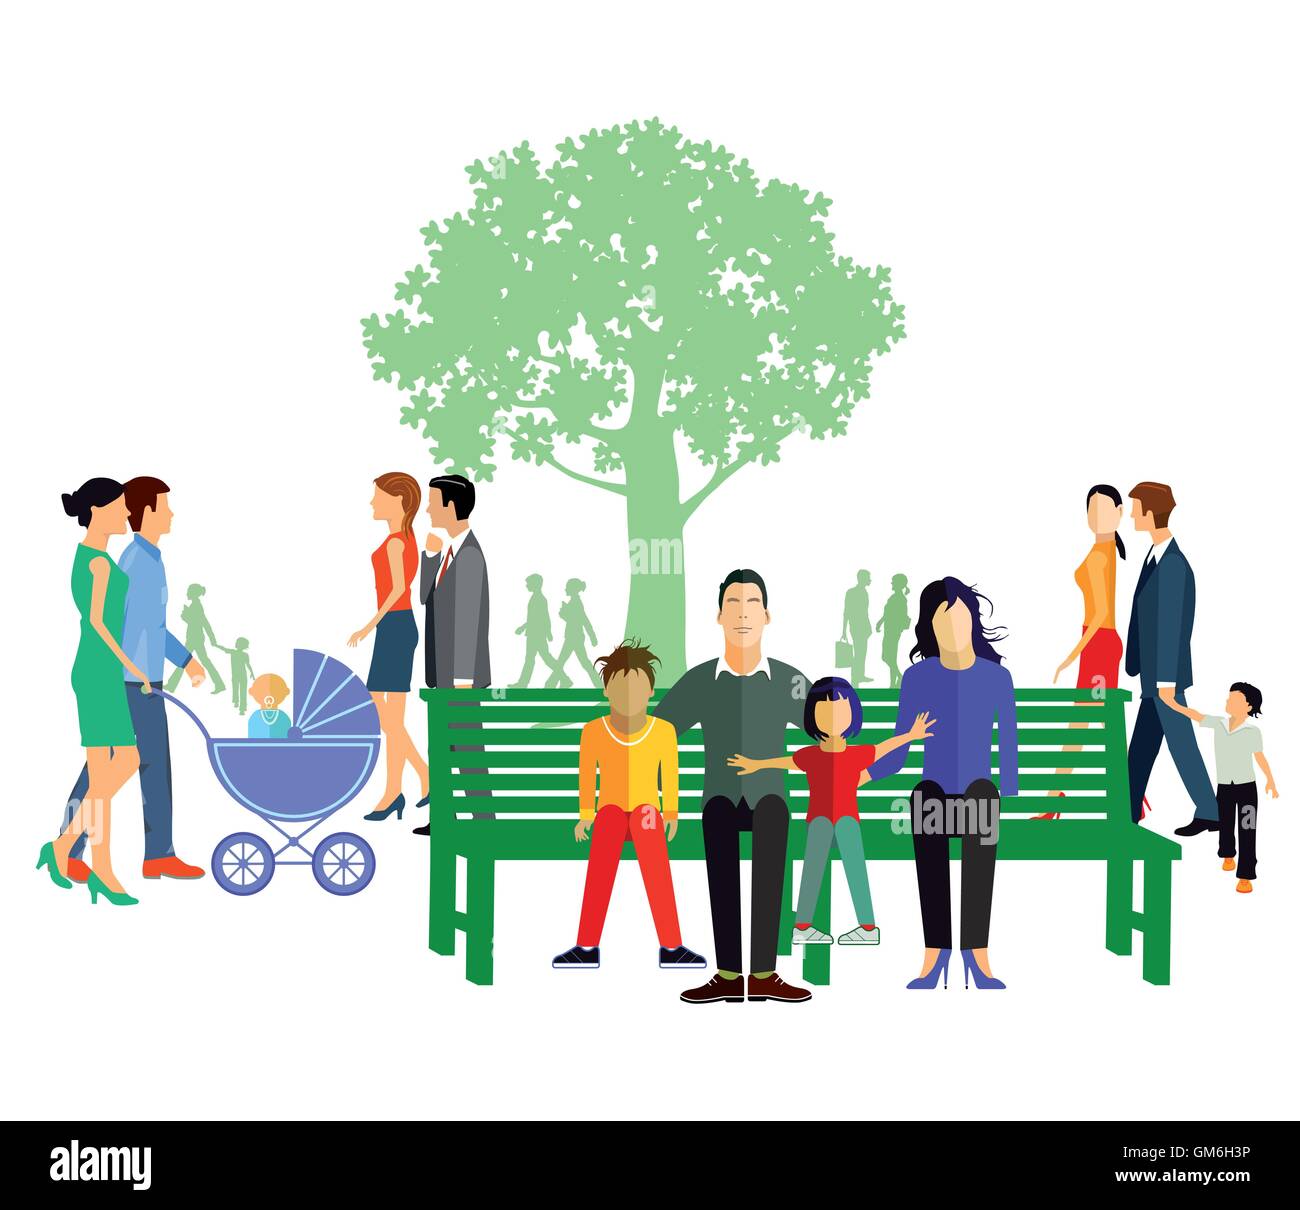 Leisure with family Stock Vector